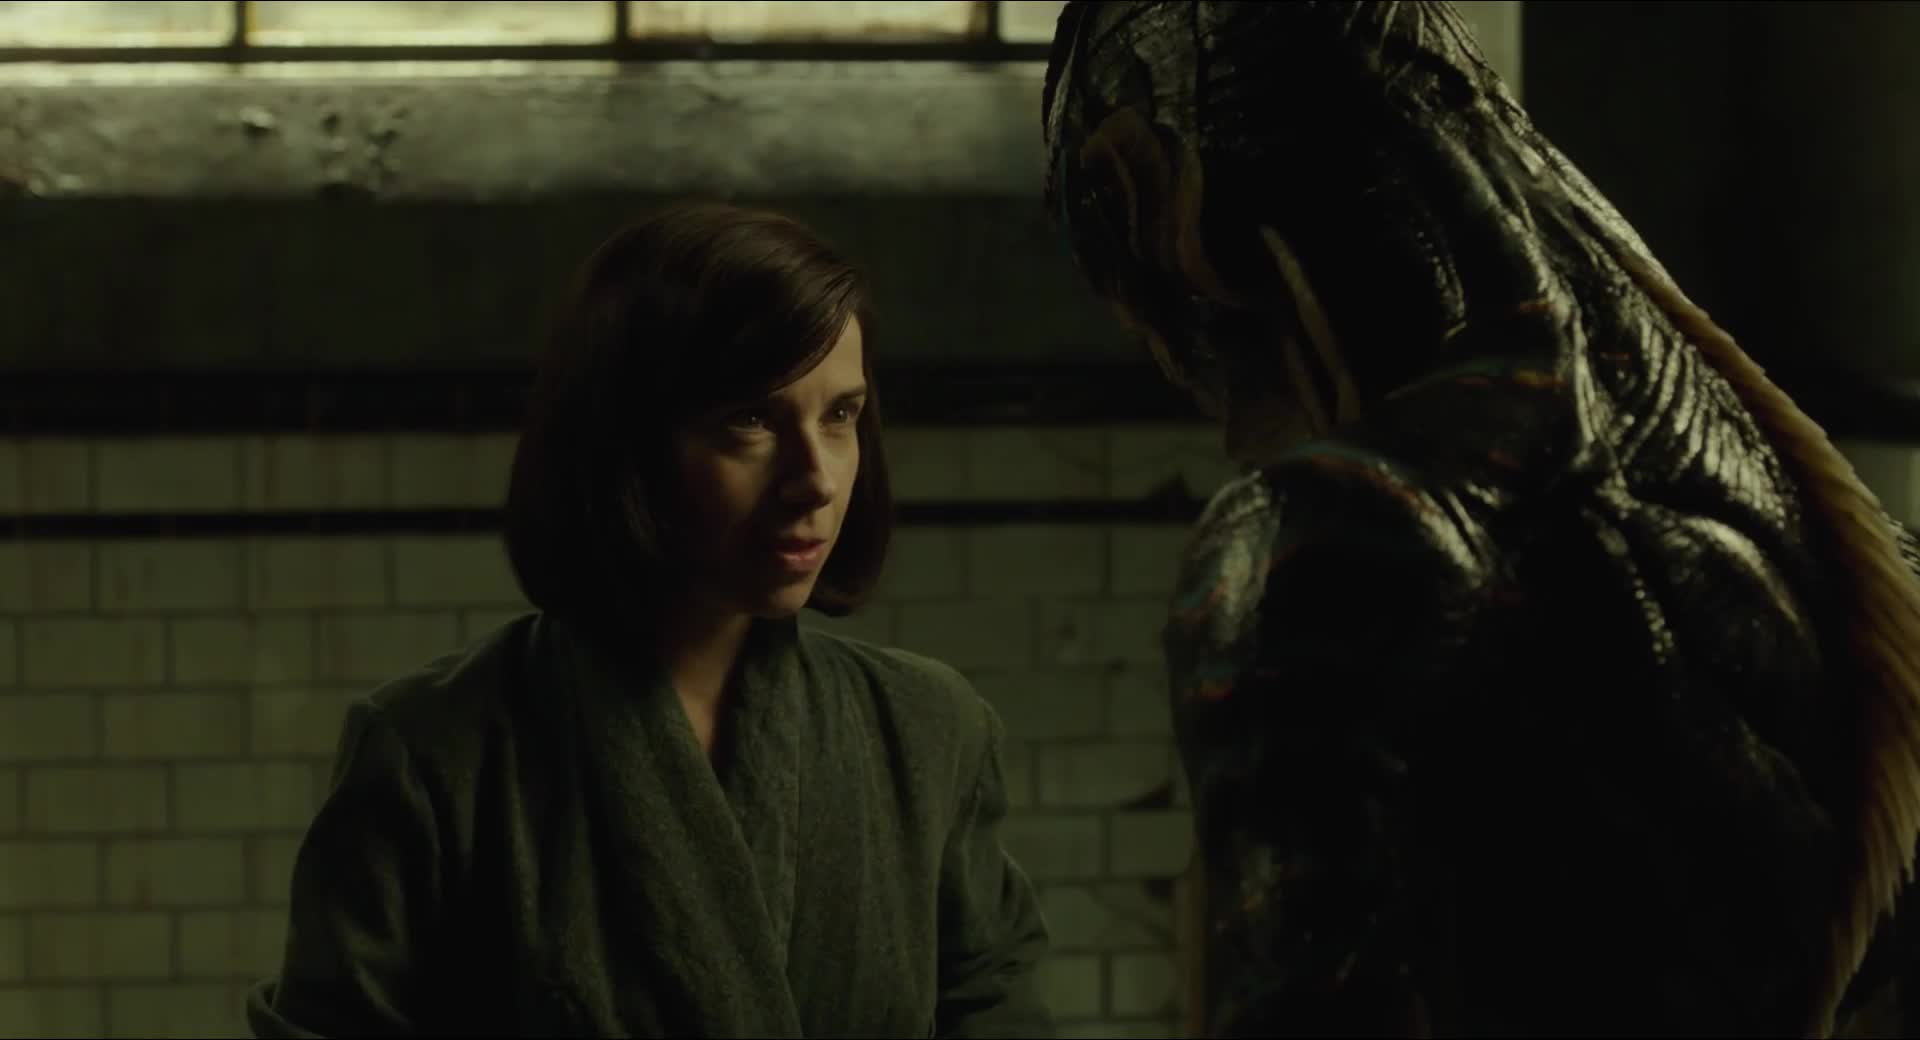 Horror movie nudes: Sally Hawkins - The Shape of Water - GIF Video.